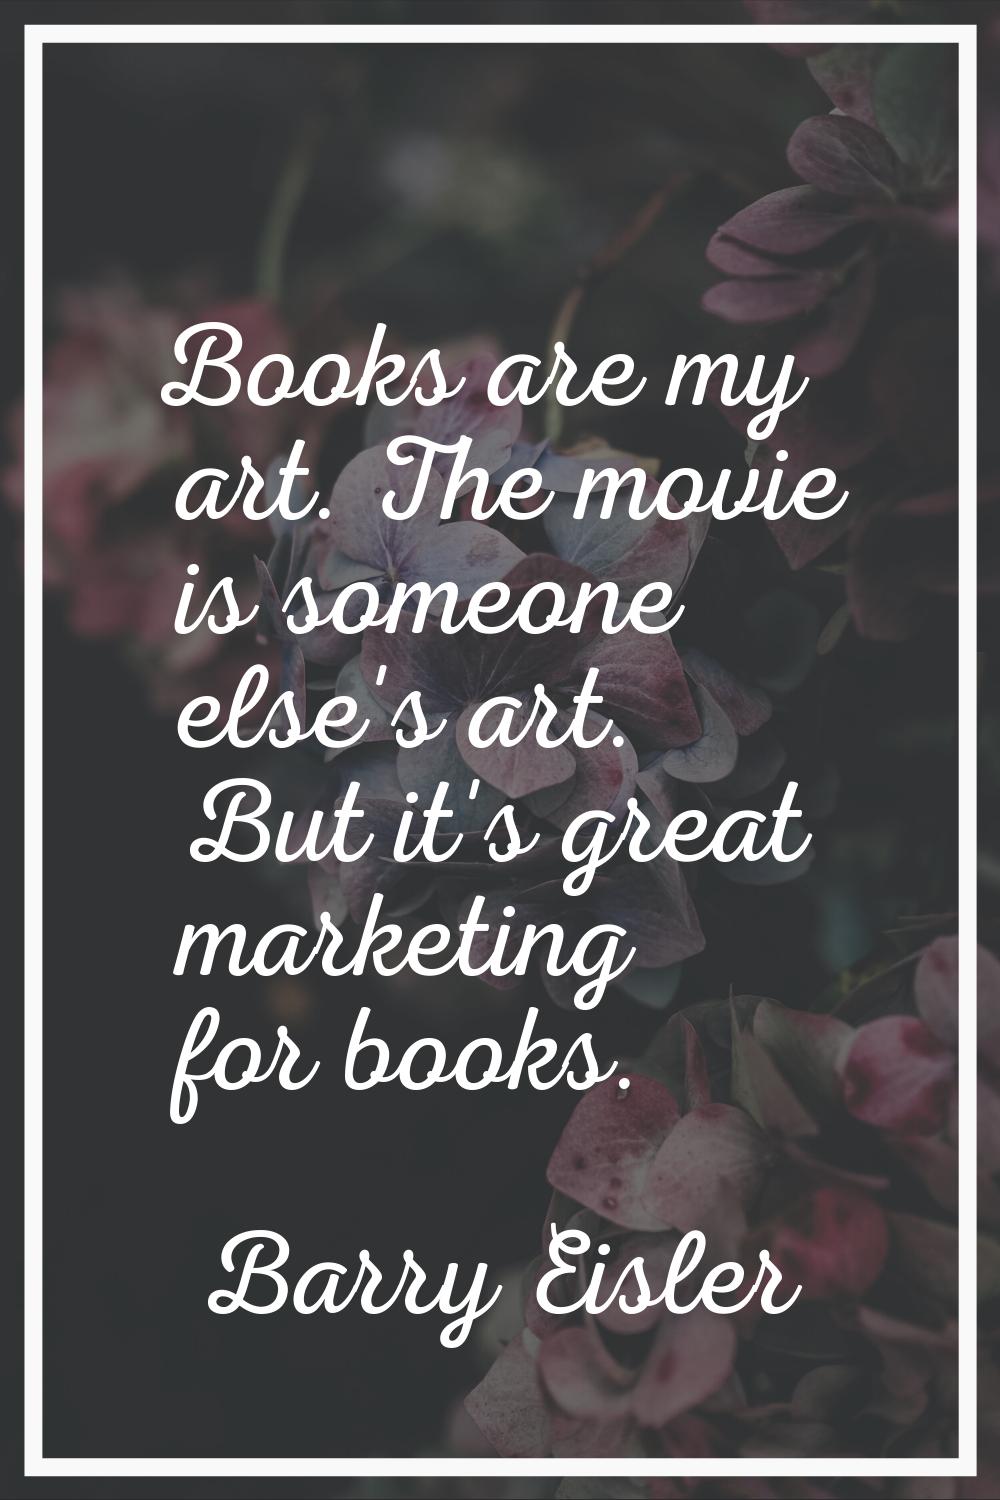 Books are my art. The movie is someone else's art. But it's great marketing for books.